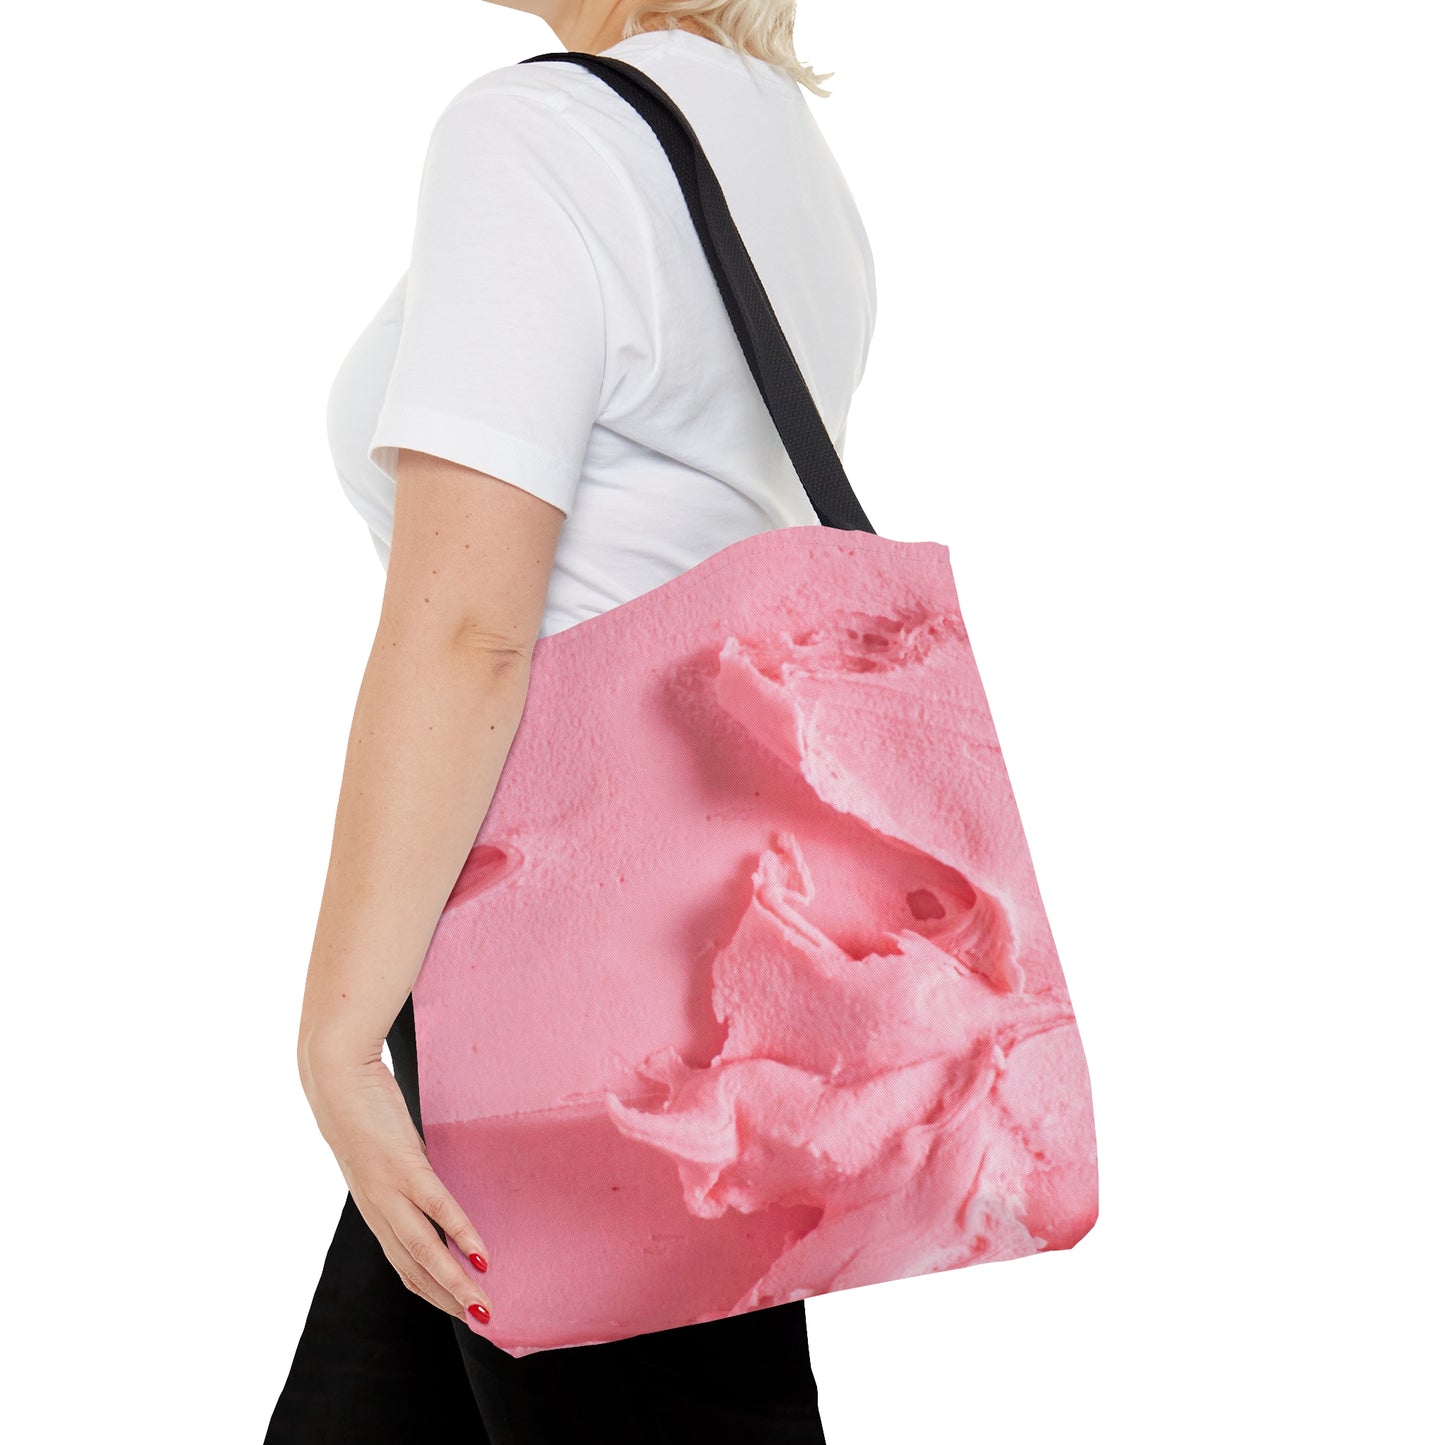 Whipped Pink Frosting Tote Bag